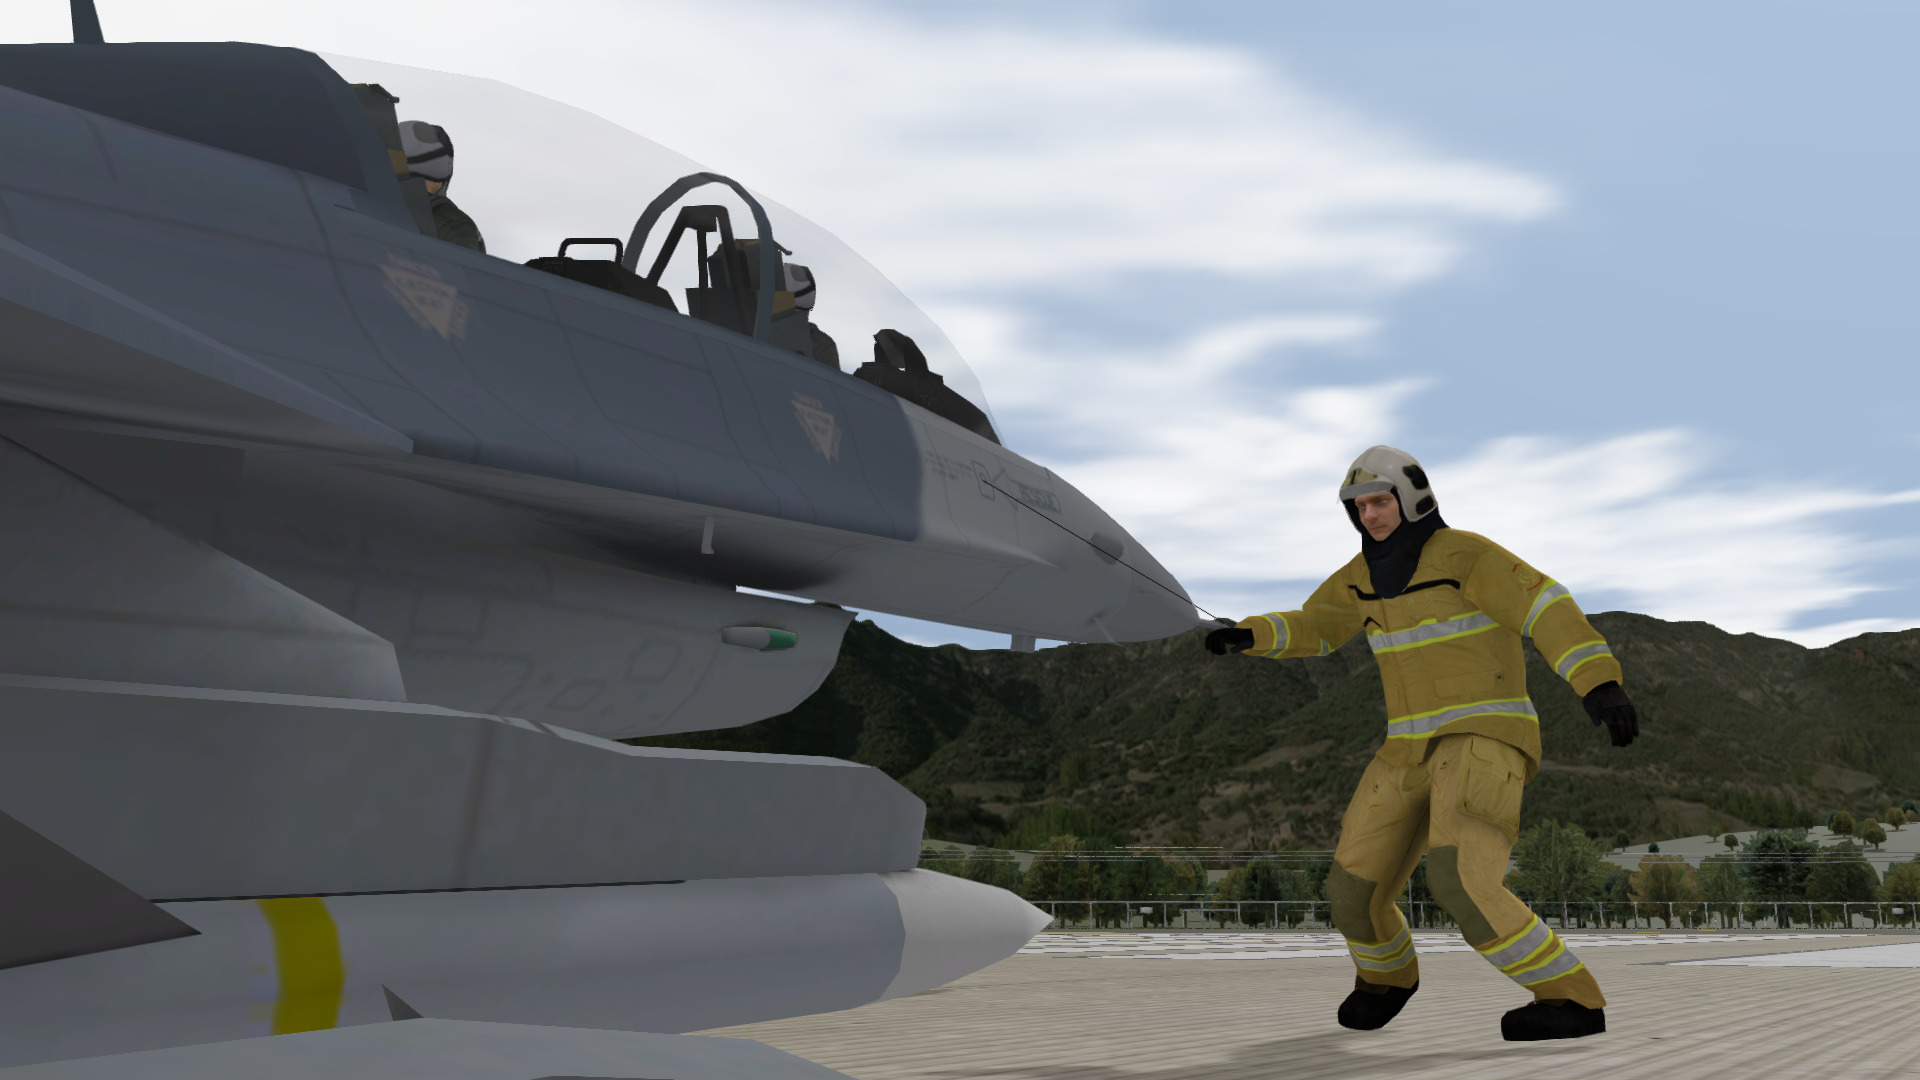 Firefighter jettisons the F-16 Canopy to extract the pilot during simulation training of emergency procedures.